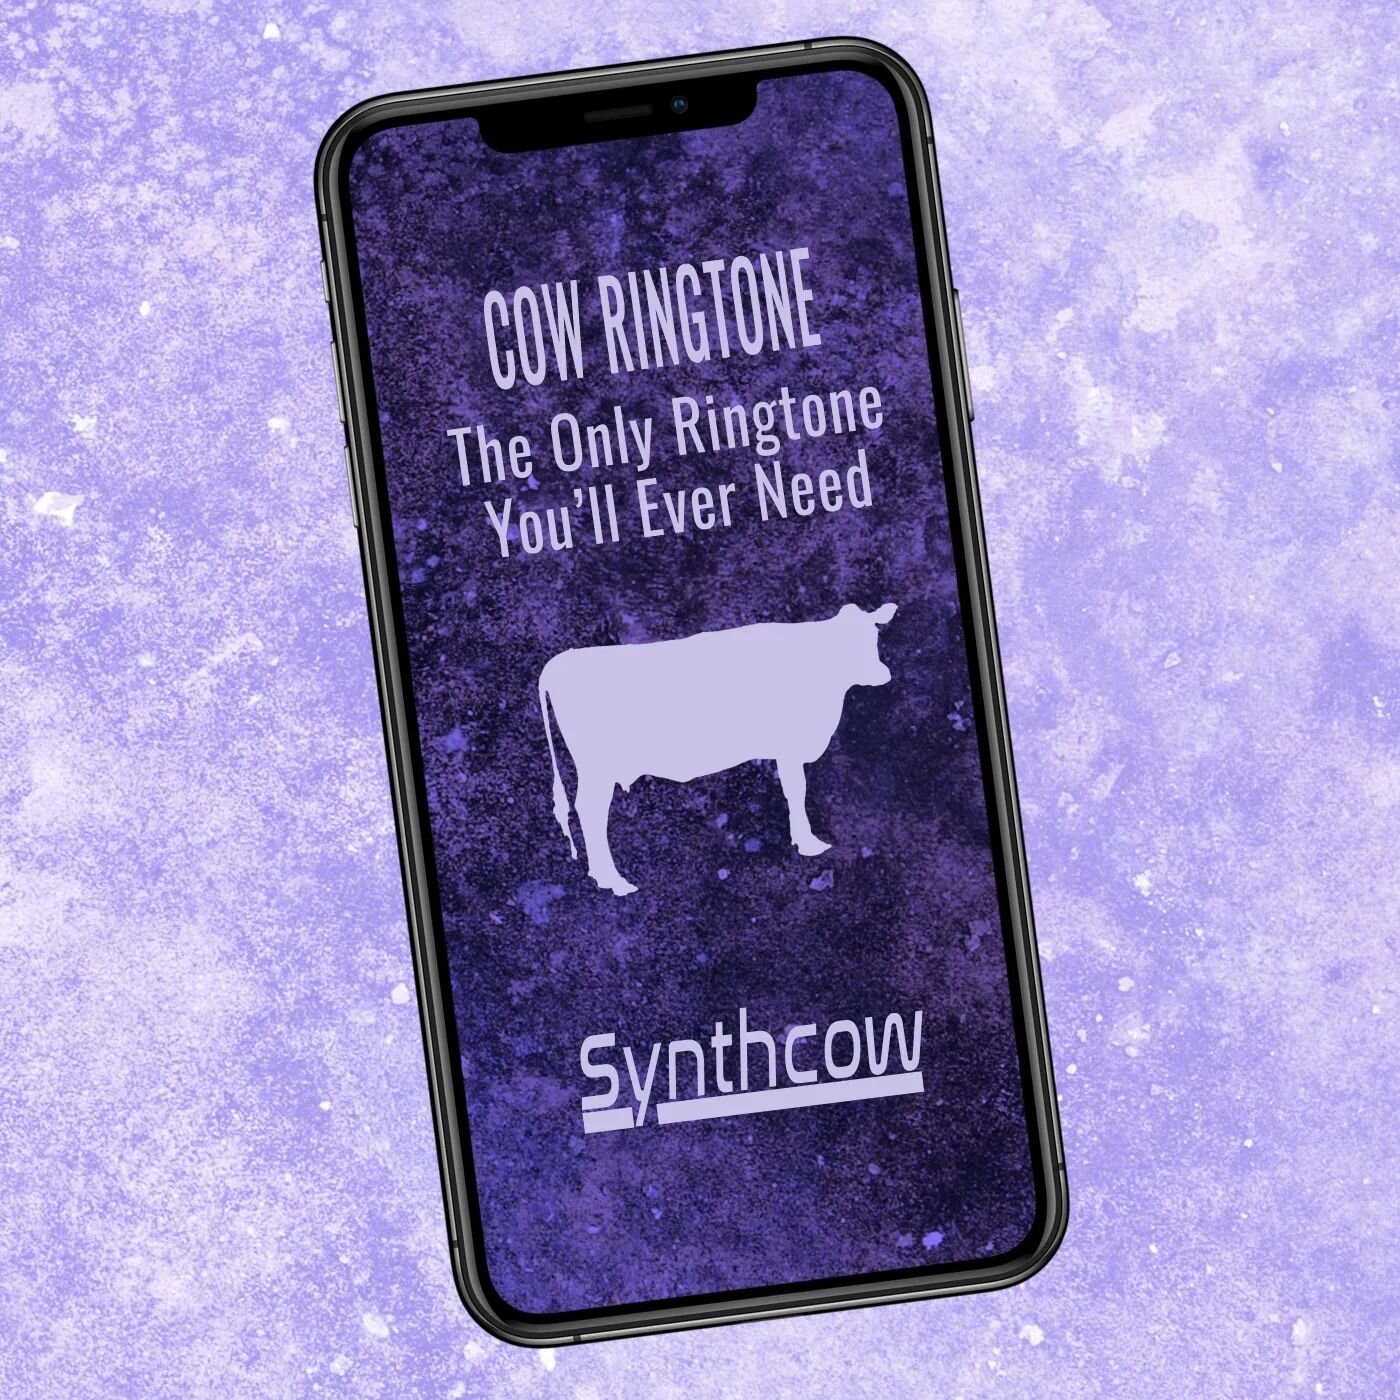 OUT NOW: To celebrate our pending name change to a certain barnyard animal, we're releasing our first ringtone titled SYNTHCOW, free to download on our BandCamp! It's the only ringtone you'll ever need. Moo, moo!

Download the first of many cow ringt